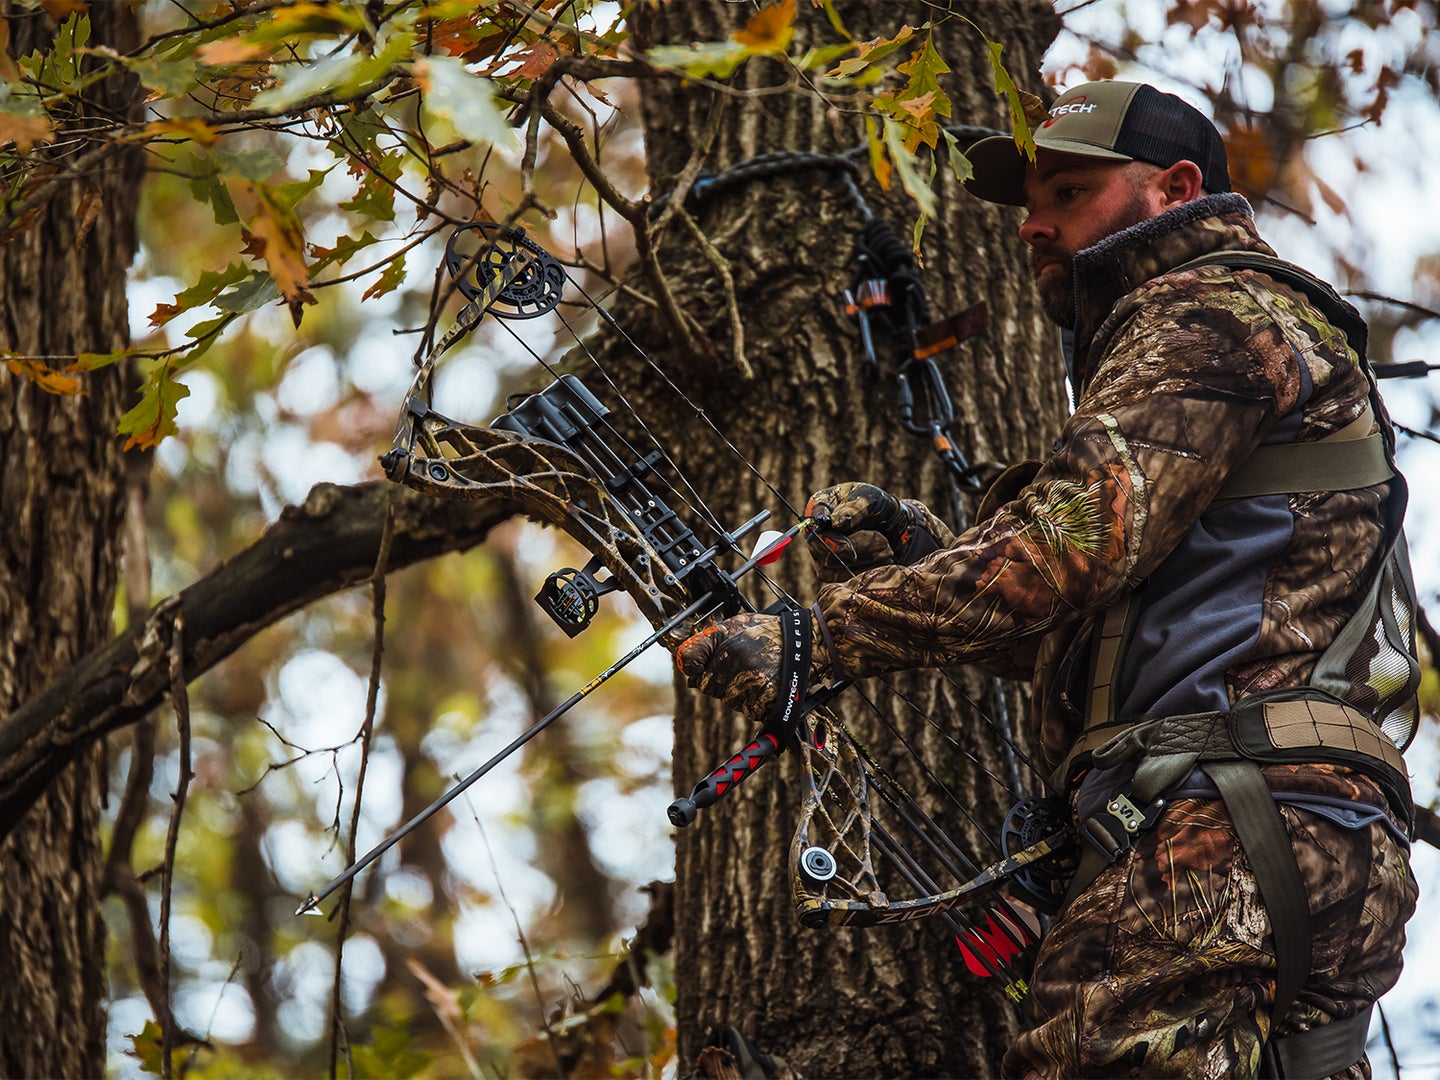 A hunter stands in a treestand and holds a compound bow.